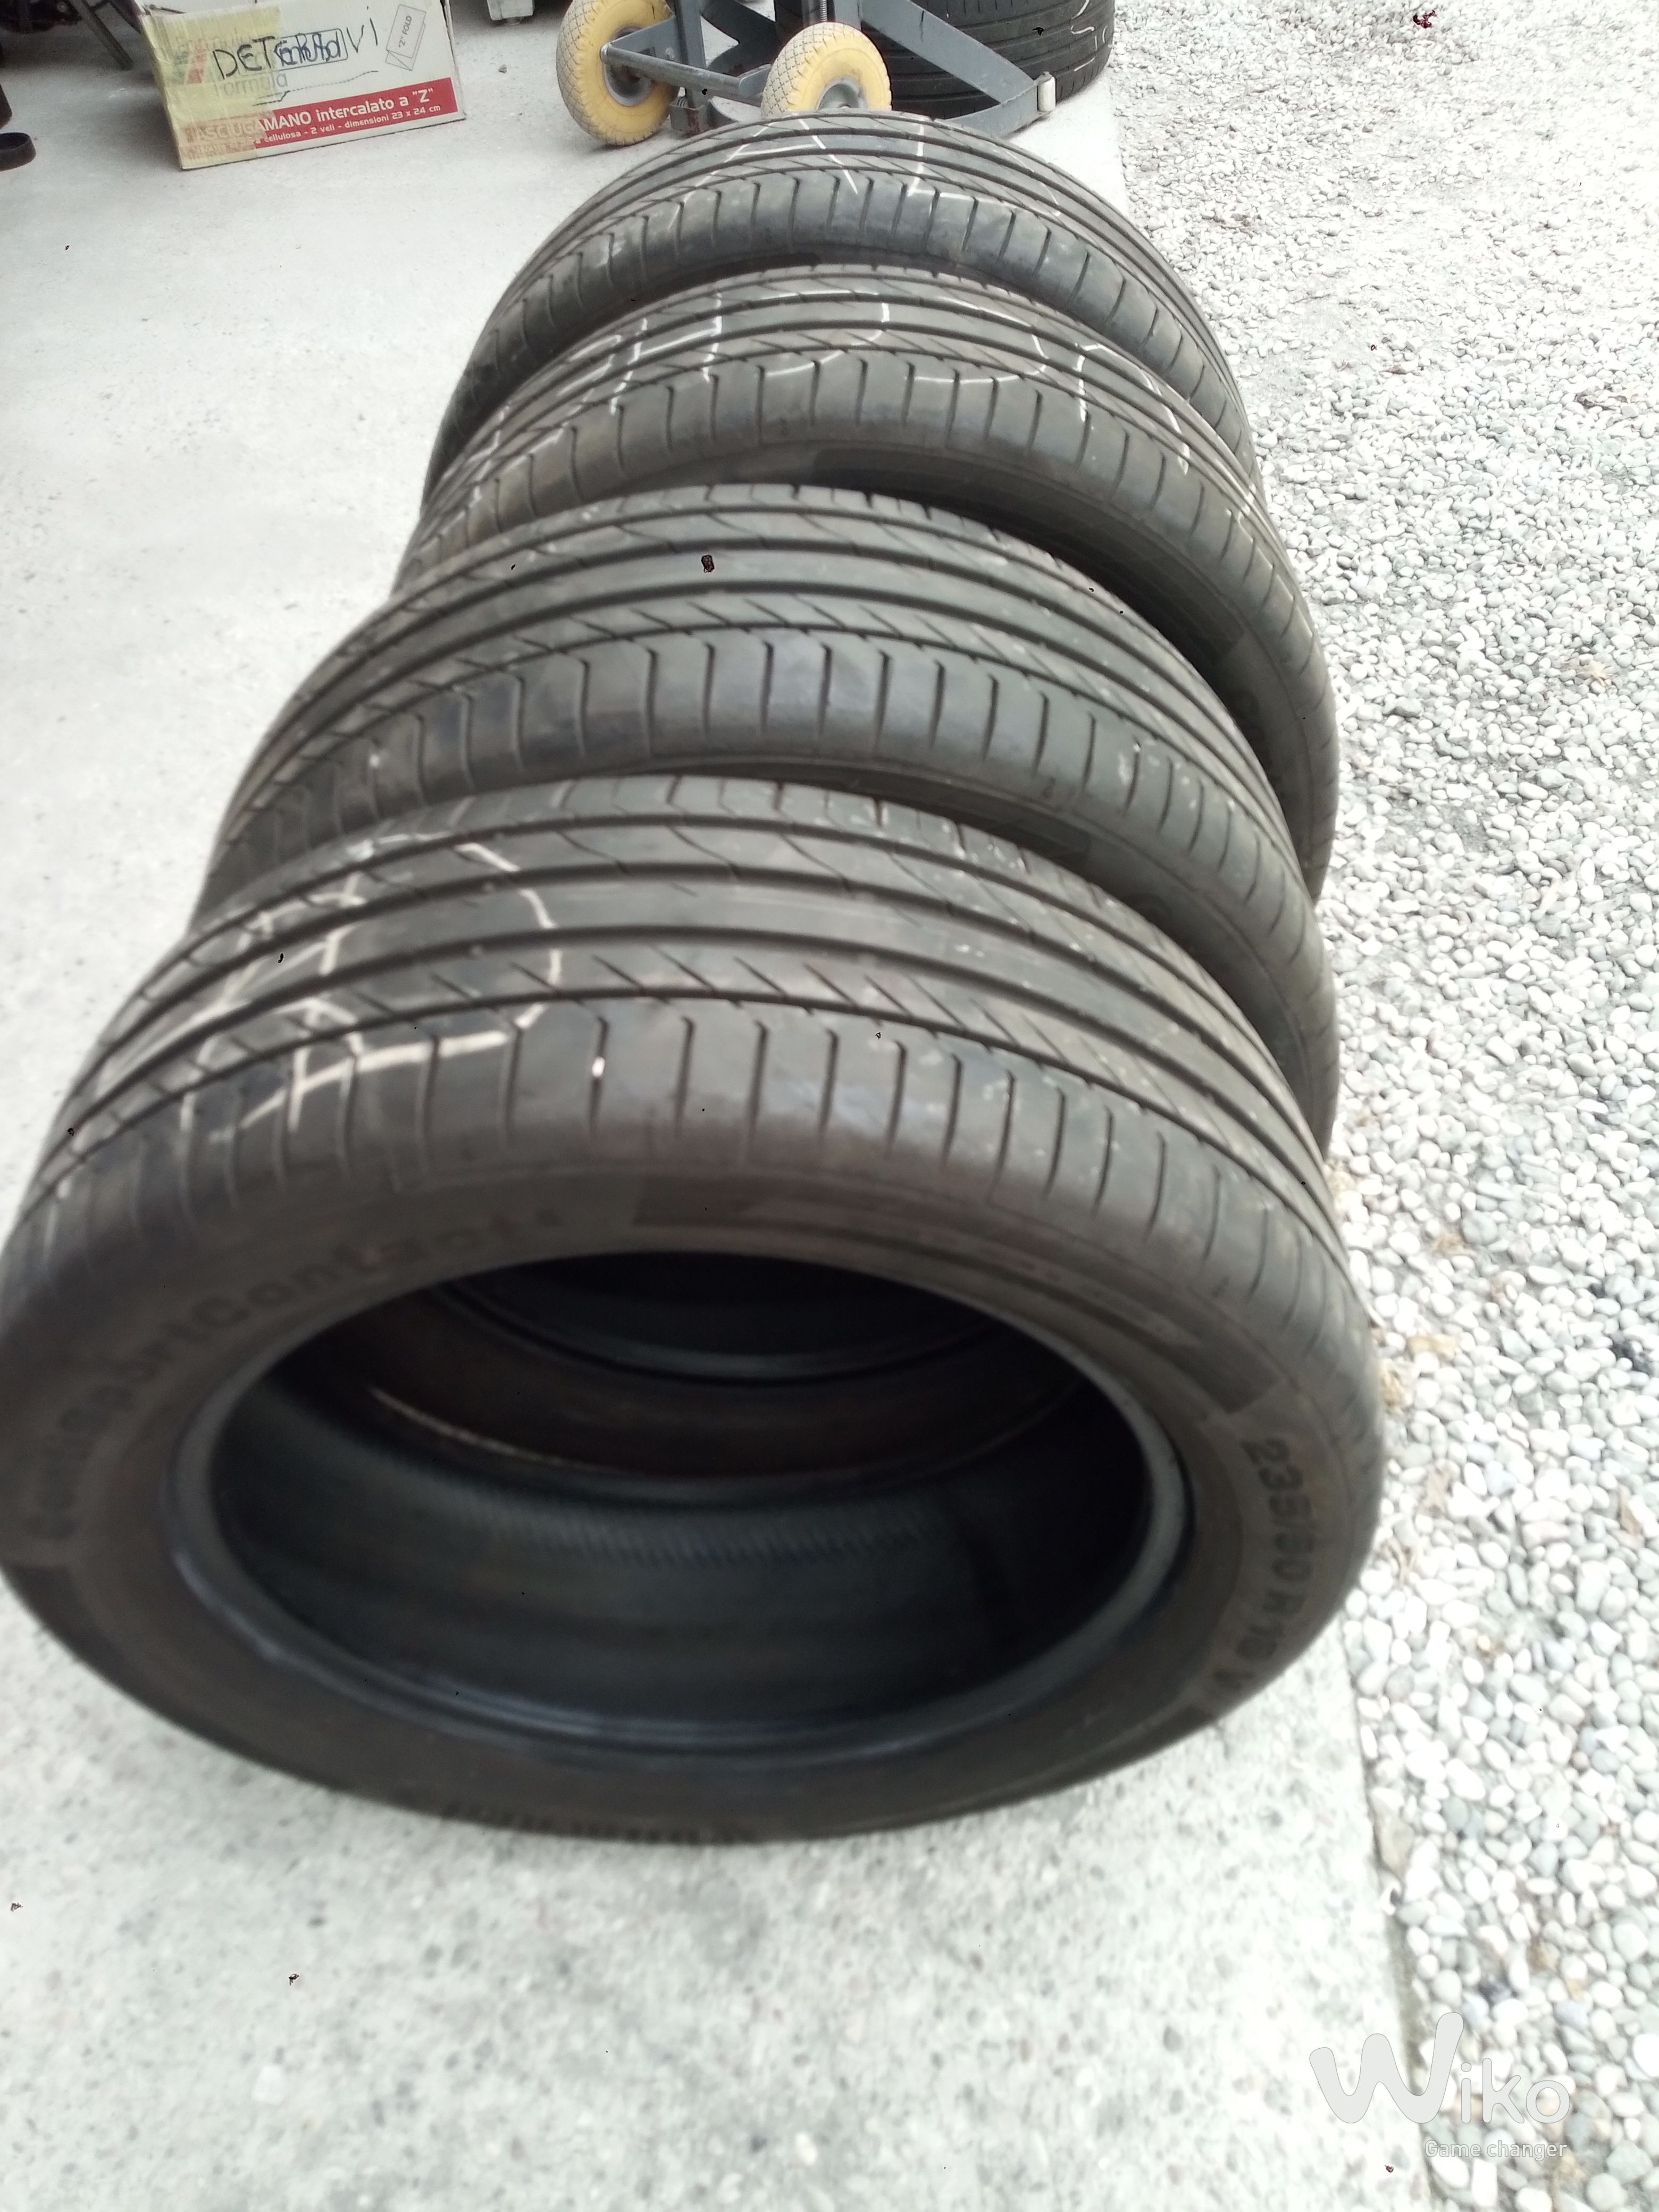 4 GOMME ESTIVE CONTINENTAL usate 235/50/18